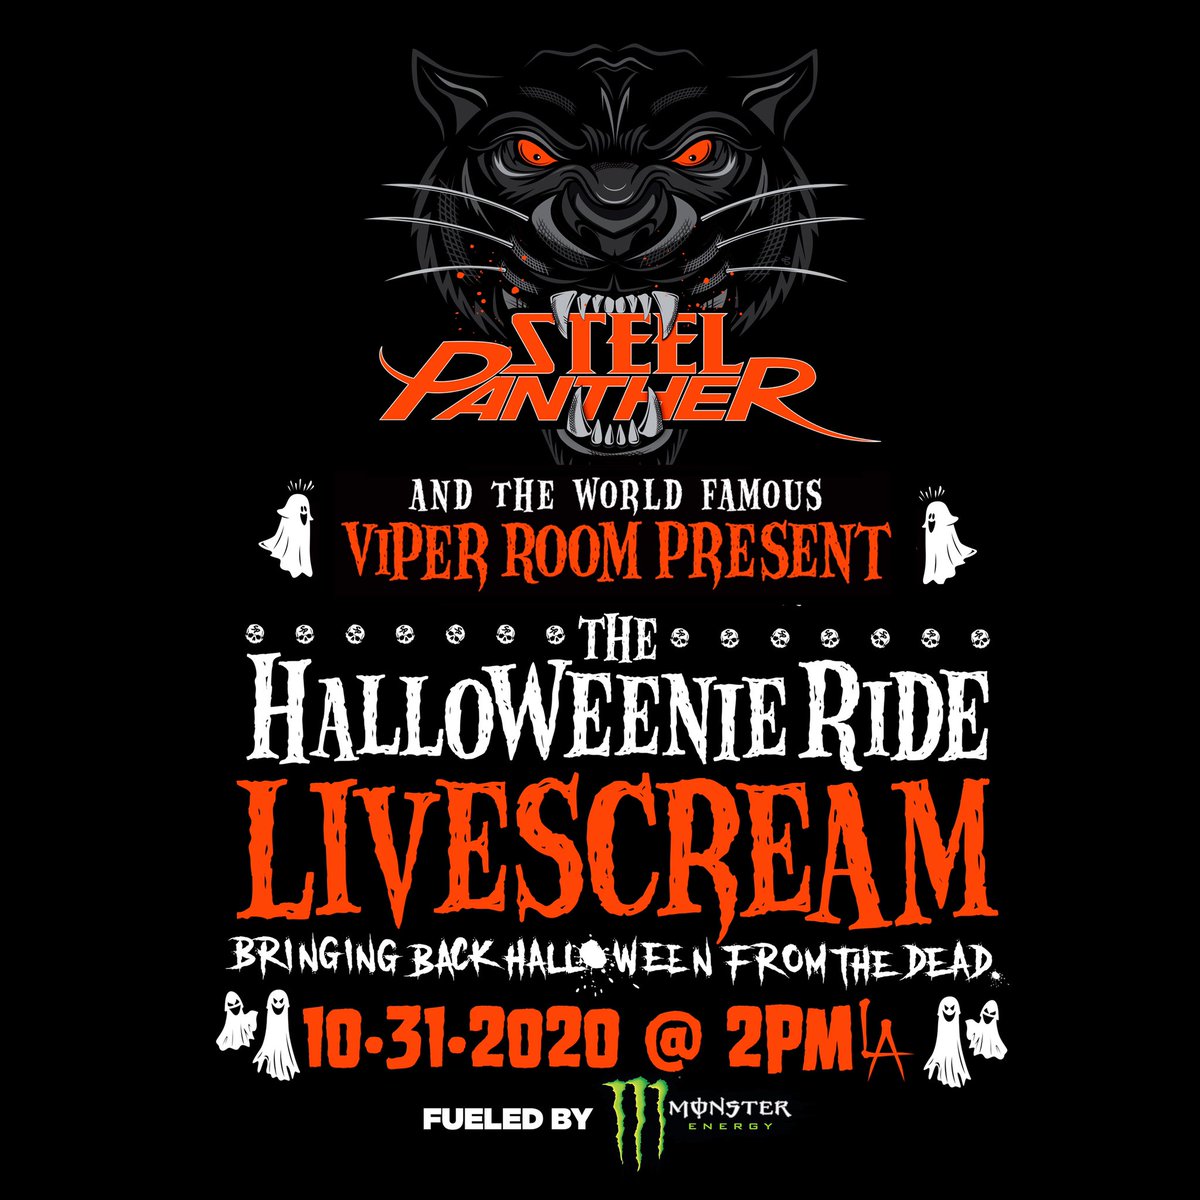 The Viper Room and Steel Panther Present The Halloweenie Ride Livescream 10.31.20 Ticket link: bit.ly/HalloweenieRide #steelpanther #halloween #viperroom #sunsetstrip